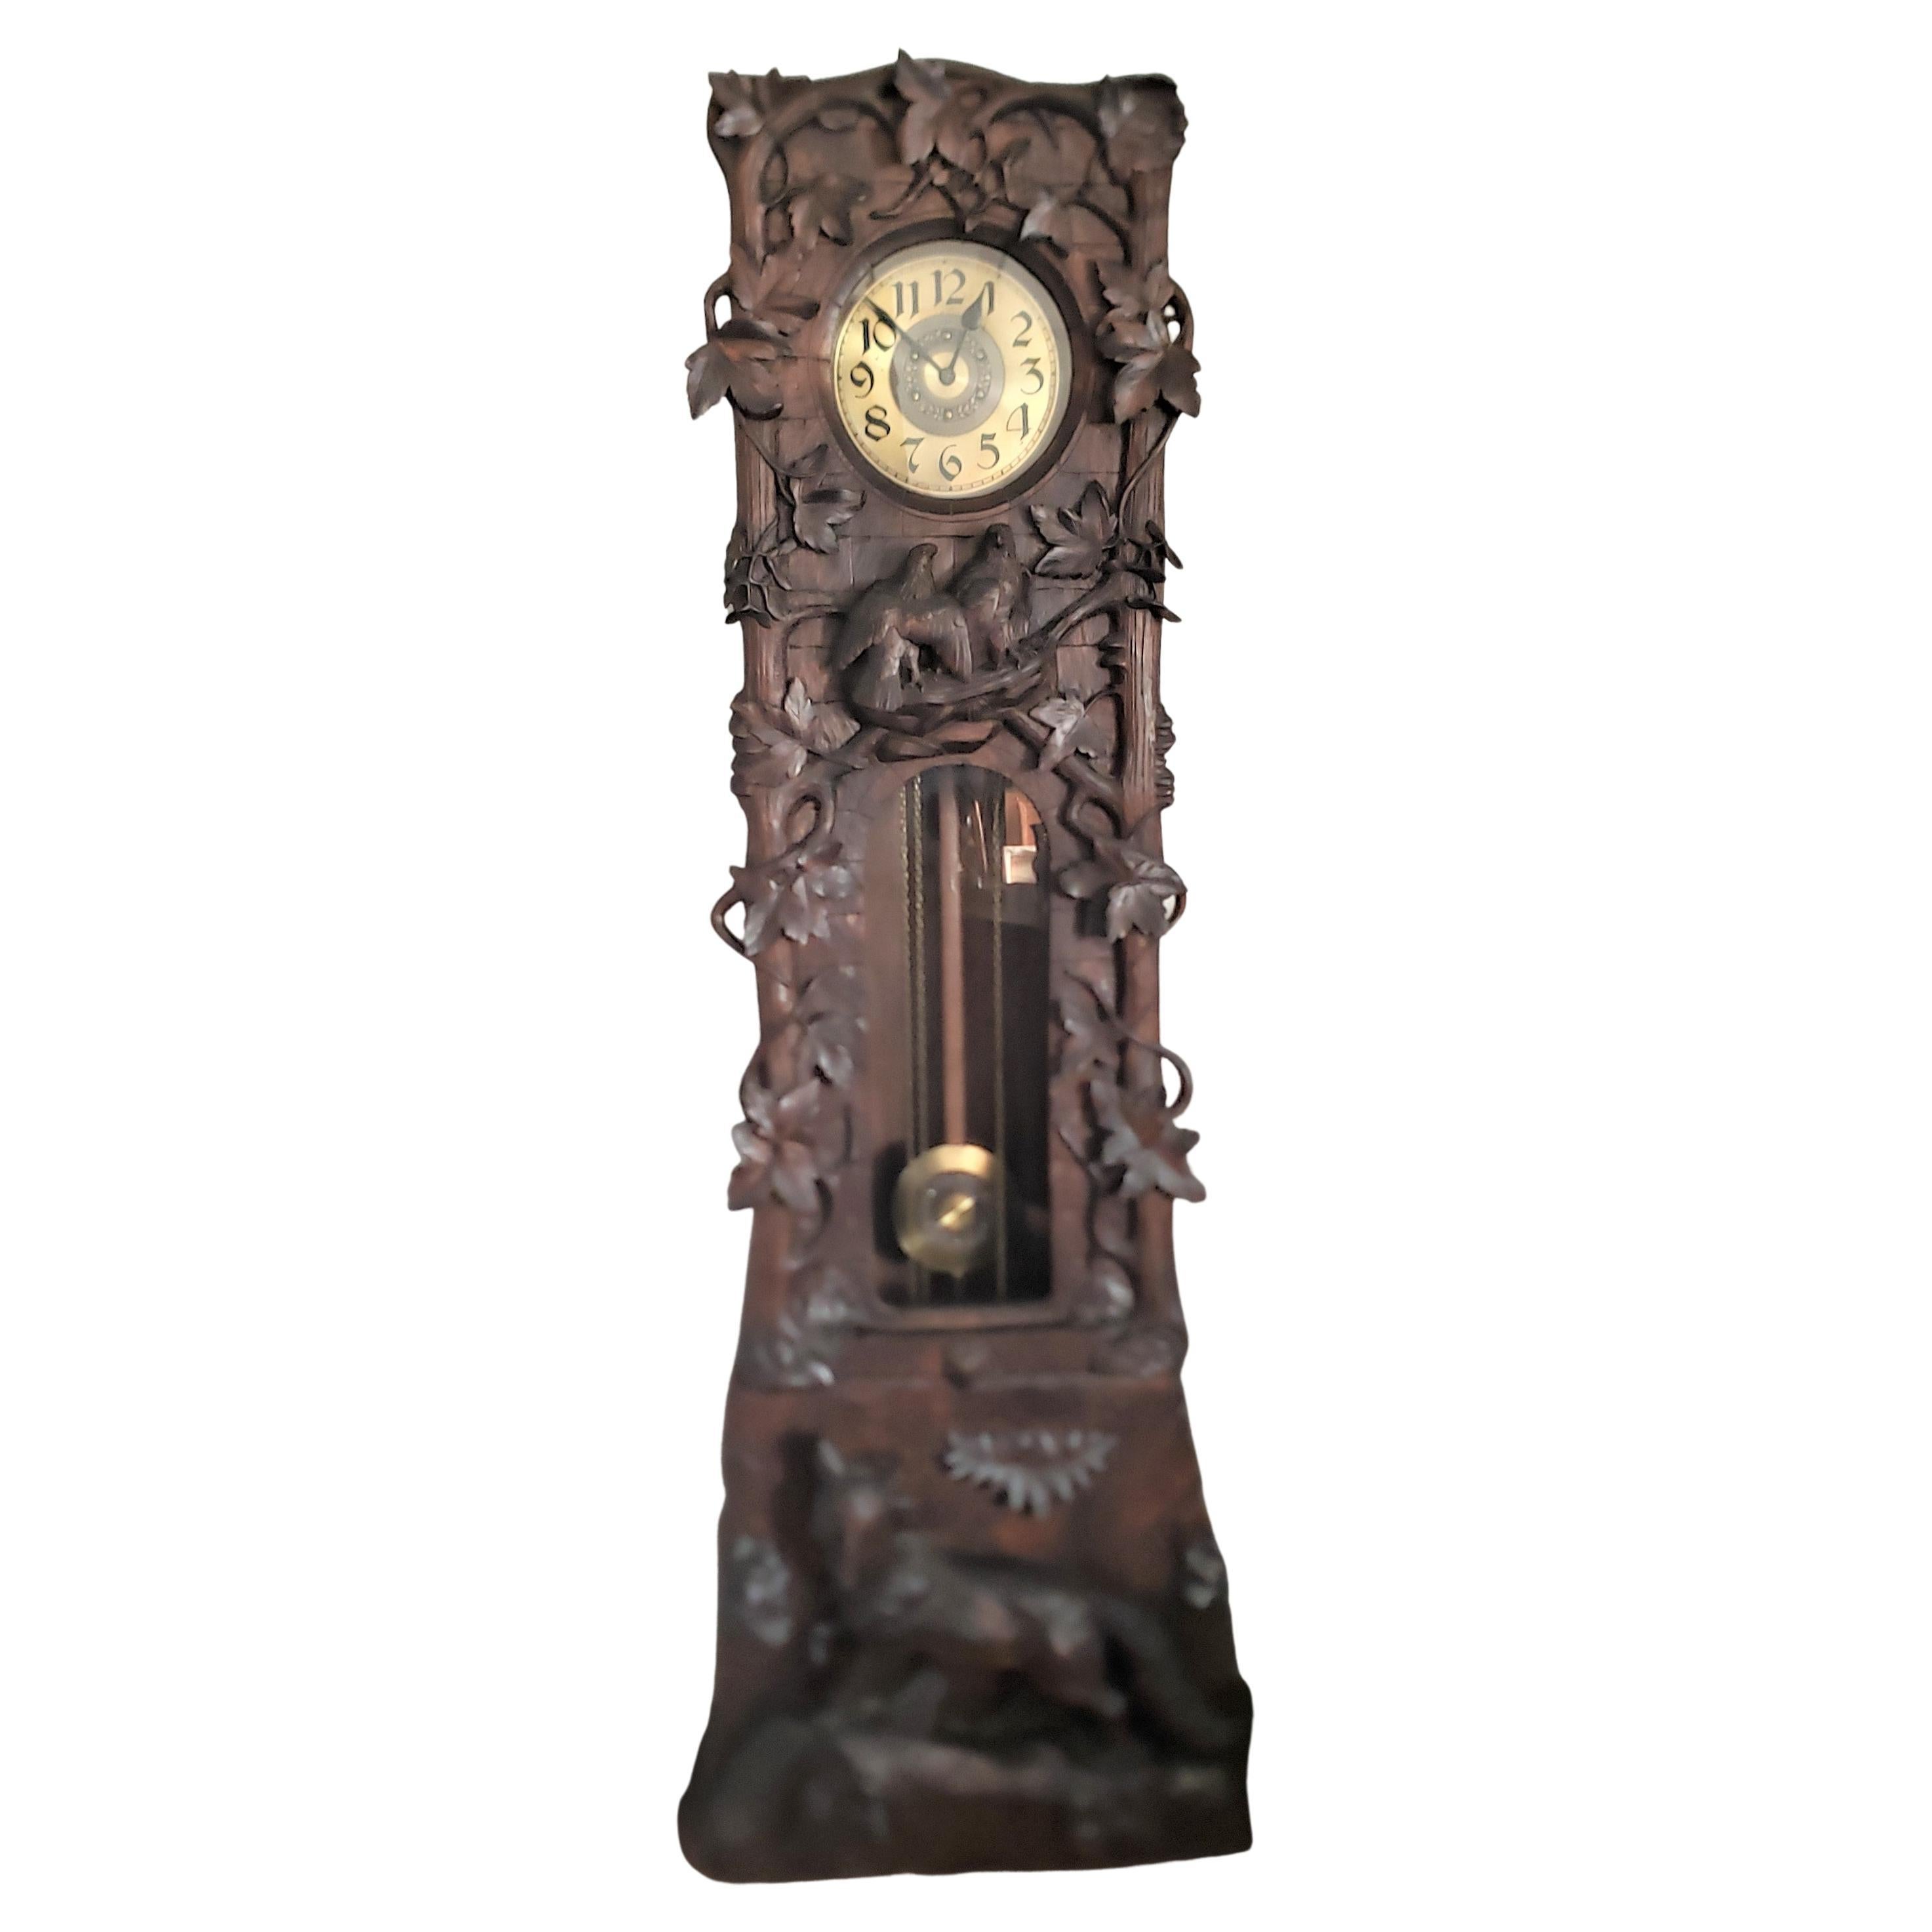 Antique Peter Trauffer Black Forest Longcase Clock with Hand-Carved Fox & Birds